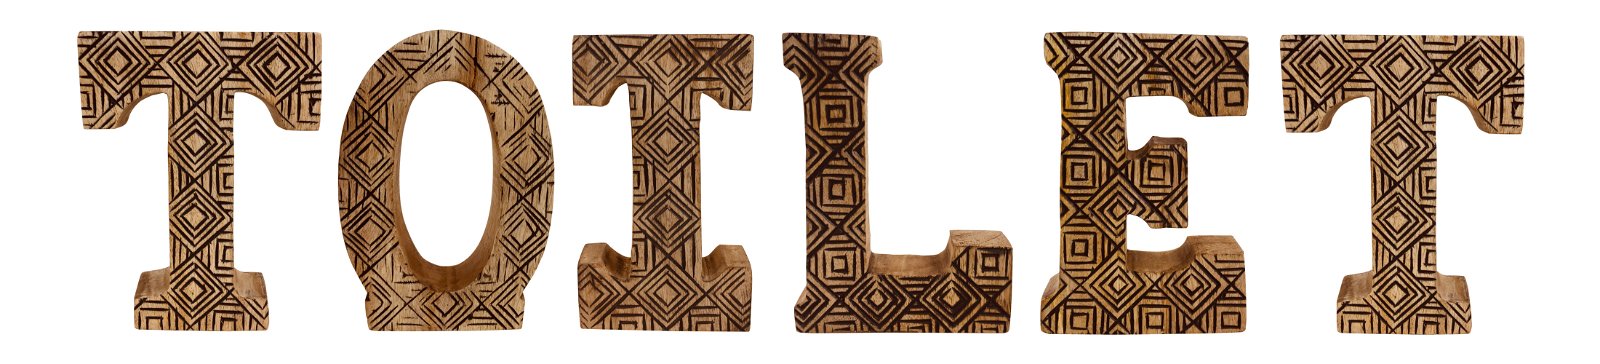 Hand Carved Wooden Geometric Letters Toilet - Kaftan direct